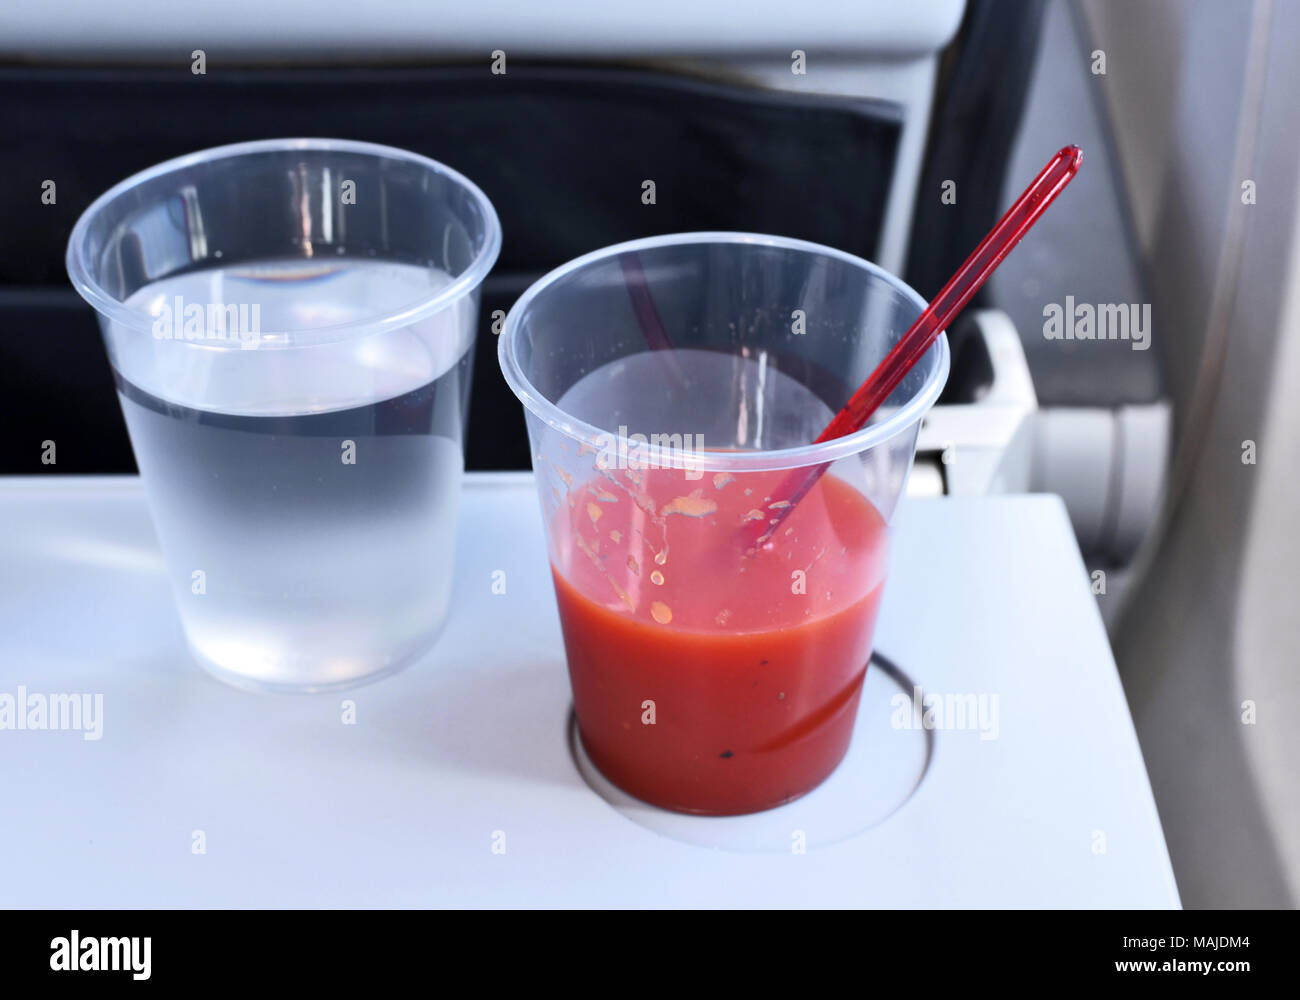 Travel by plane, flight service. Two drinks on an airplane seat table. Plastic drinking glasses with water and tomato juice. Stock Photo